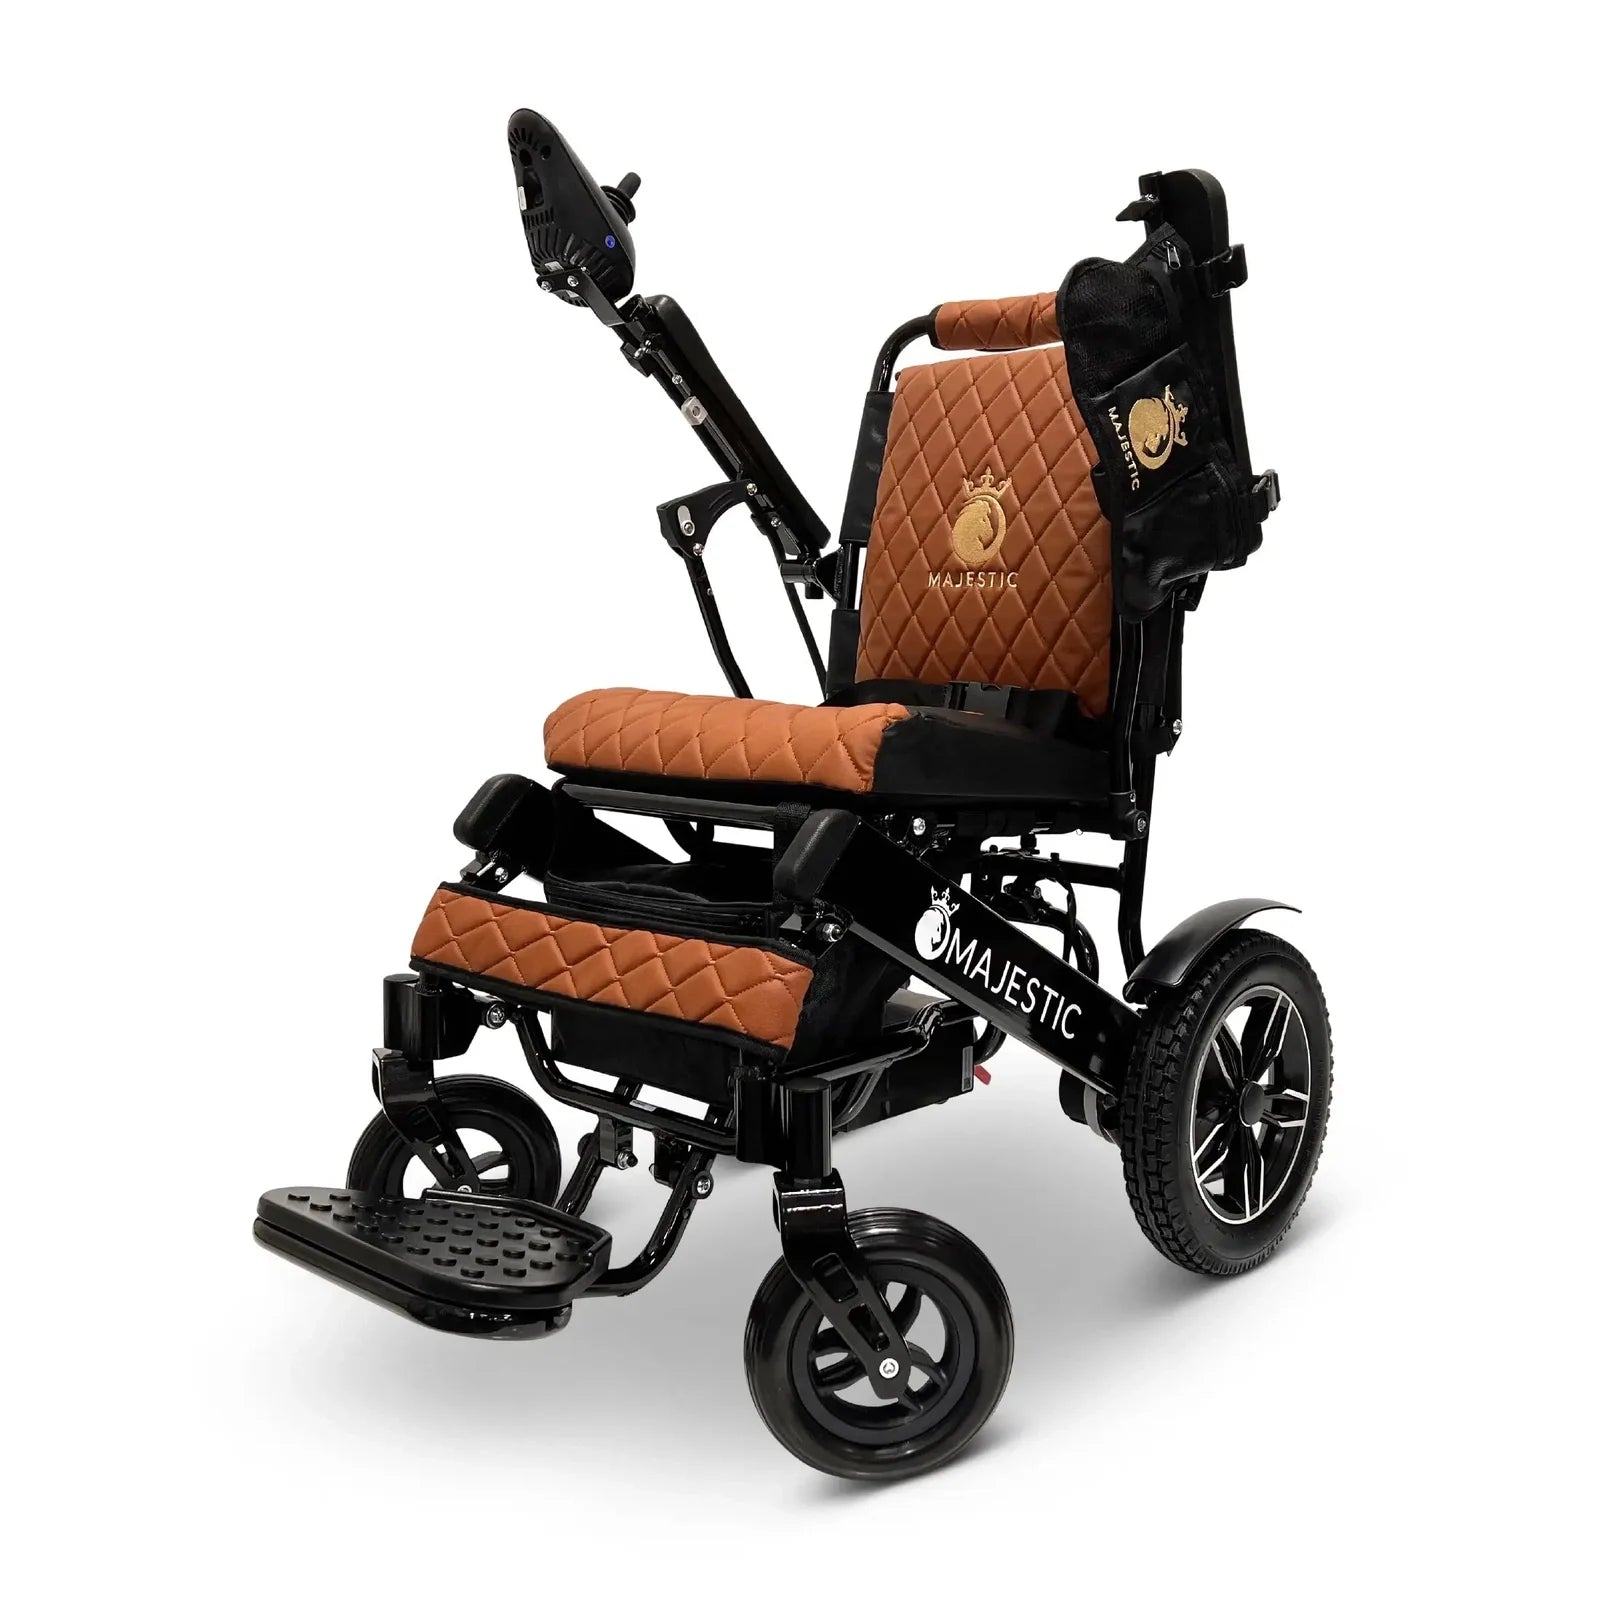 ComfyGO Majestic IQ-8000 Remote Controlled Lightweight Folding Electric Wheelchair Power Wheelchairs ComfyGO Black Taba 10 Miles & 17.5" Seat Width